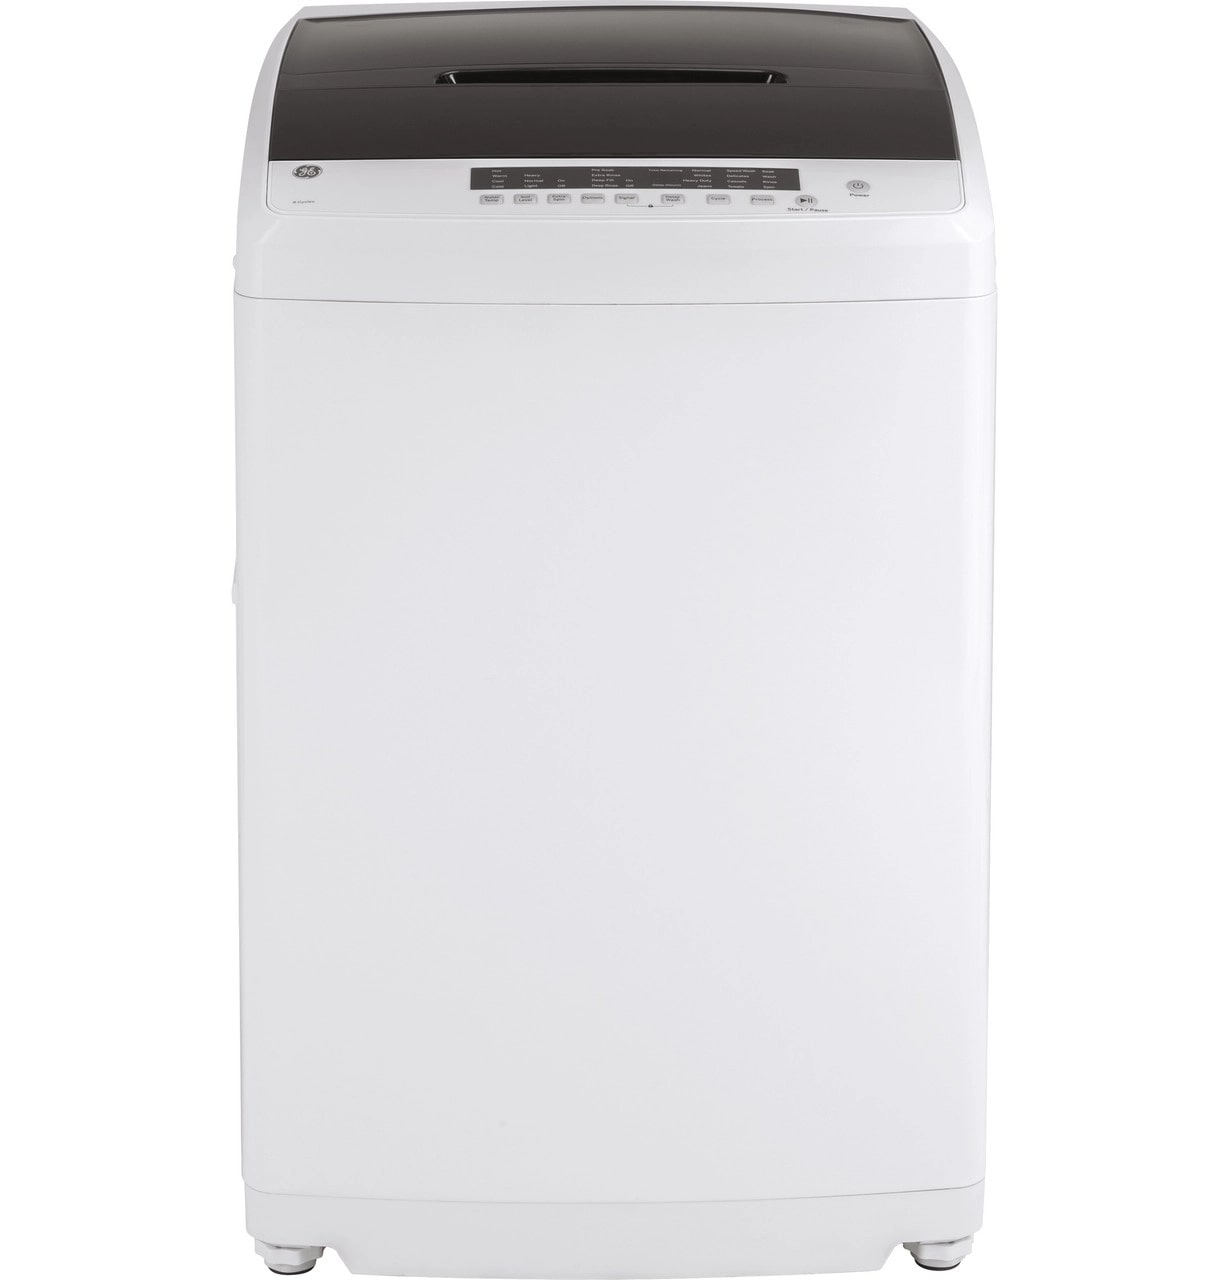 GE - 3.3 cu. Ft  Top Load Washer in White - GNW128SSMWW